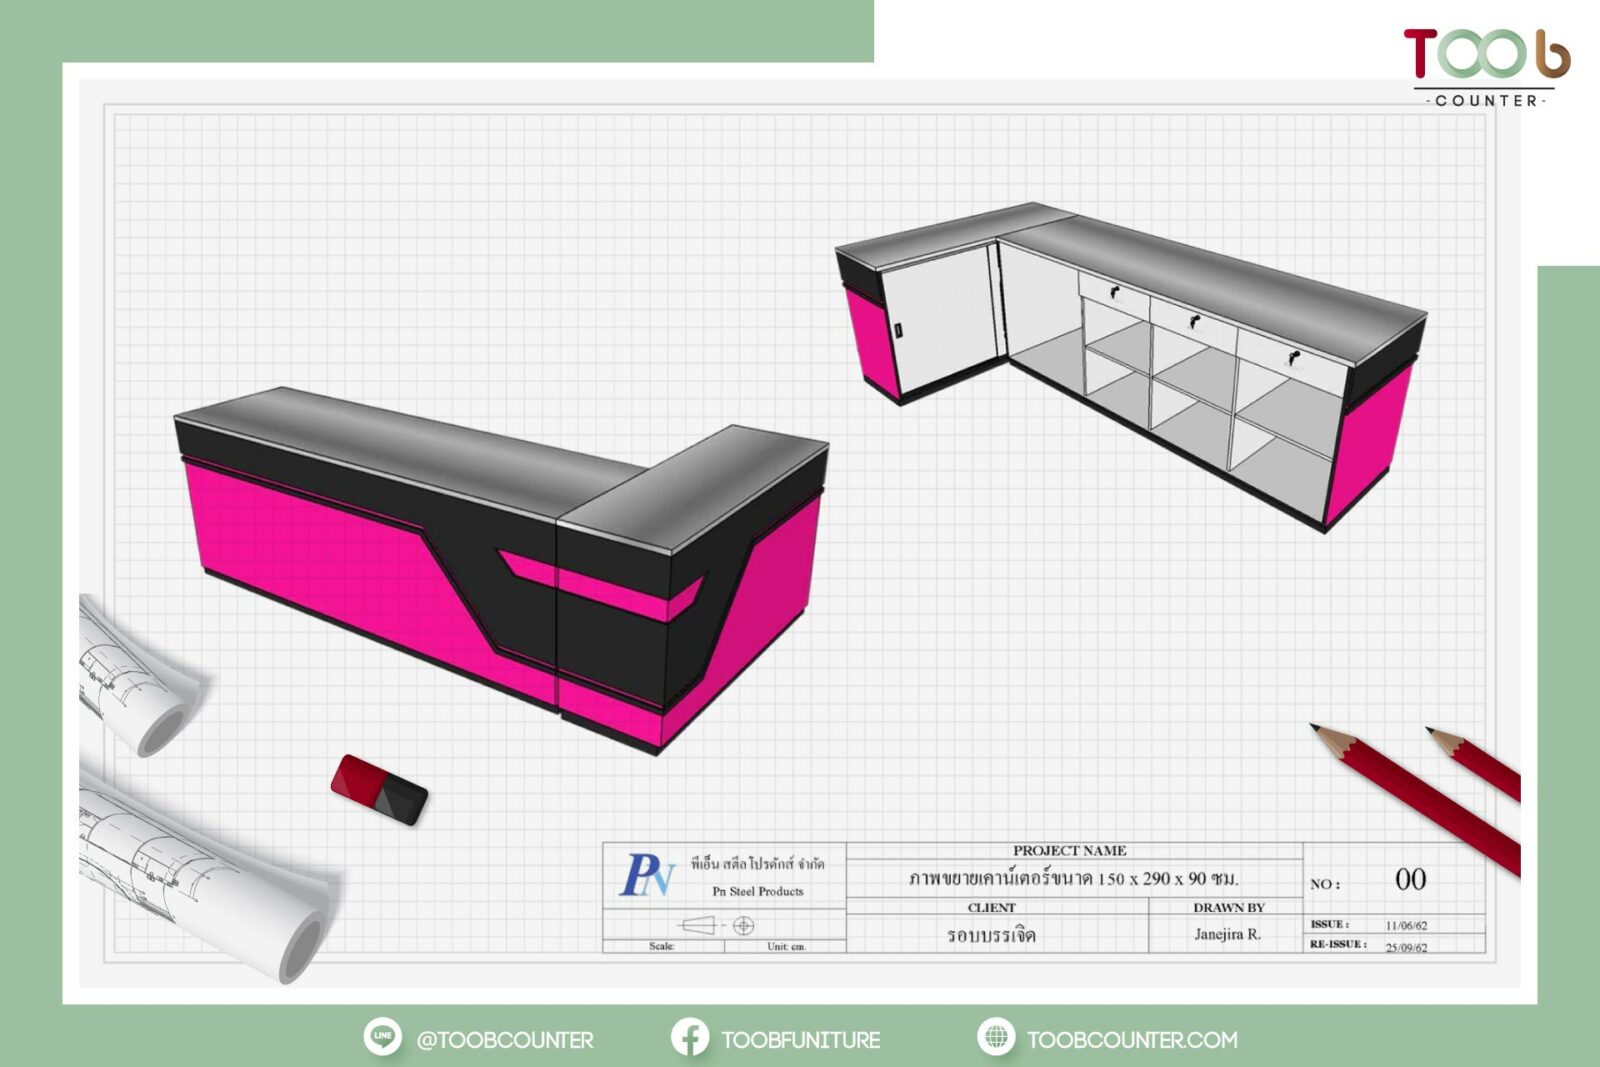 Drawing perspective view design l shaped black pink cashier counter